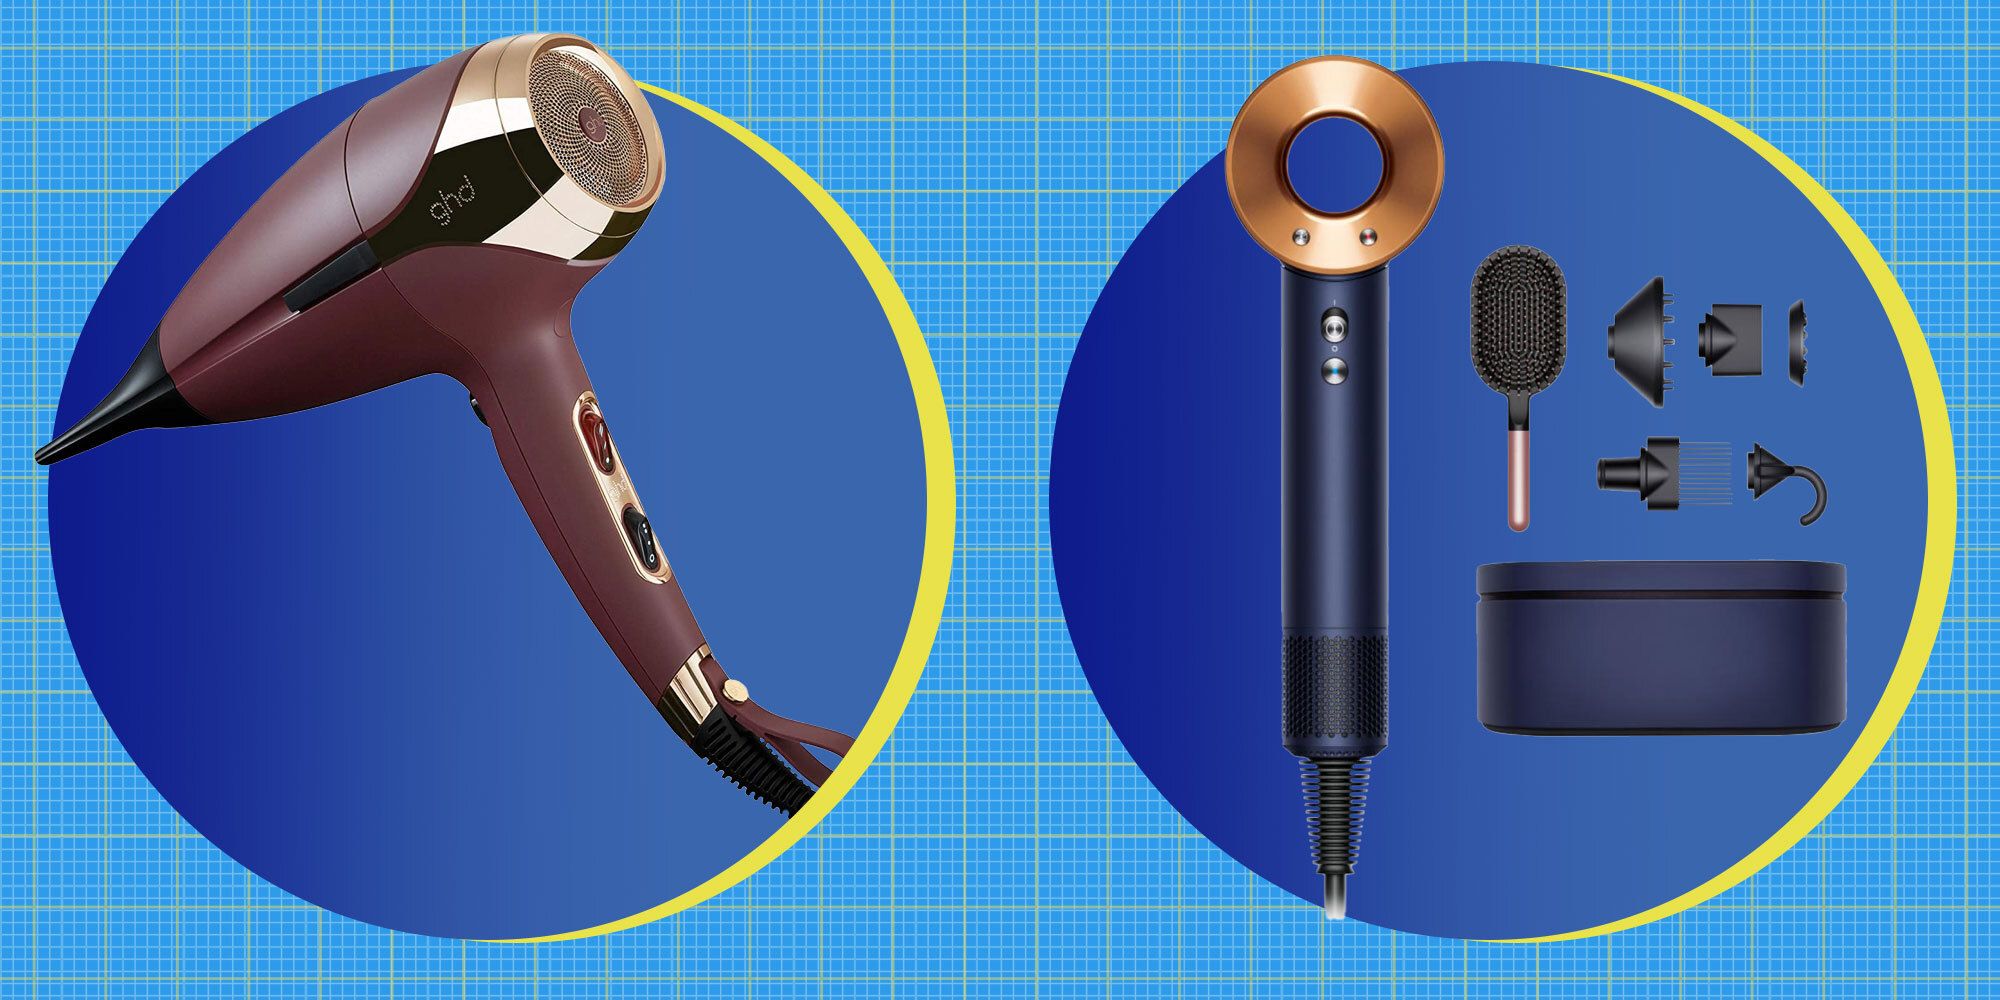 <p><strong>USING A</strong> <strong>HAIR</strong> dryer is the key to getting a professional-level style at home. Think about it: your barber or hairstylist most likely uses one on you after they finishing cutting to help style your hair. If hair cut days are some of your best hair days overall, a hair dryer is likely part of the equation. </p><p>A hair dryer does so much more than just speed up drying time. It allows you to shape and manipulate each strand of hair to help lock in your desired style—and use less product in the process. That’s why if you’re not using a hair dryer, you could be missing out on your best possible hair.</p><h2 class="body-h2">Best Hair Dryers</h2><p>“It’s important for men to use hair dryers to create a more finished or polished look,” says <a href="https://www.menshealth.com/grooming/a38593946/melissa-de-zarate-celebrity-groomer-skincare-haircare-tips/">celebrity groomer Melissa De Zarate</a>. Messy looks are one thing, but if you’re going for a clean sleek style or “curls that hold their shape,” it’s hard to achieve without the use of a dryer. </p><p>The secret, according to De Zarate, is in the attachments. The concentrator can help focus the dryer’s warm air to help slick hair back, create volume with the aid of brushes and help de-frizz for a sleek look. And if you have curly hair, you can (and should) still use a dryer with the aid of the diffuser attachment. There’s no better way to get defined curls that keep their shape, she says. </p><p>There are so many different hair dryers available at every single price point, which makes it tricky to find the best hair dryer for your hair type and style needs. Luckily, we’ve done the leg work for you. This list of the best hair dryers for men is the perfect place to start your drying and styling journey. </p><h2 class="body-h2">What To Consider</h2><p class="body-text">Buying a hair dryer can be a little like buying any other appliance—confusing if you don’t know what you’re looking for. Hair dryers come in a variety of shapes and sizes, each with its unique features and benefits. However, there are a few basic things to consider when shopping for a new tool:</p><h3 class="body-h3"><strong>Power</strong></h3><p class="body-text">The power of a hair dryer is expressed in watts. Generally, a higher wattage indicates faster drying time, because that means the dryer is circulating more airflow. Those with thick or long hair will want to consider a hair dryer with higher wattage, as these models will dry their hair faster than low wattage dryers.</p><h3 class="body-h3"><strong>Weight</strong></h3><p class="body-text">Most hair dryers are between 1-2 pounds, which doesn't sound like much, but if you have a lot of hair to dry, holding a blow dryer above your head for an extended period of time can feel like an arm workout. Lighter hair dryers are easier to maneuver, but they also tend to be less powerful, though that's not always the case. If you travel frequently, a lighter model is more convenient to carry in your luggage. Make sure the hair dryer you choose feels comfortable to hold and use for extended periods of time.</p><h3 class="body-h3"><strong>Attachments</strong></h3><p class="body-text">If you have a complicated style that you’ll use the dryer for every day, consider investing in a model with more attachments and heat settings so you can make sure you get the most out of your dryer. If you have curly hair, make sure to get one with a diffuser attachment and a low-heat setting so you don’t fry your curls. And if you have a short, uncomplicated ‘do and just want to use the dryer to get out of the bathroom quicker, you may just need something simple.</p><h3 class="body-h3"><strong>Heat and Speed Settings</strong></h3><p class="body-text">The best hair dryers have variable heat and speed settings because different hair types and textures require different settings. High heat can reduce drying time, but a hair dryer that gets too hot can also cause heat damage to those with thin hair, which can lead to issues like hair loss. Those with thicker hair types can benefit from high heat and speed settings to dry and style their hair quickly. Having the option to change heat and speed settings enables you to tailor the drying process to your preferences. You can use lower heat and speed settings for gentle air drying or higher settings for faster styling results when you're in a rush.</p><h2 class="body-h2">How We Selected</h2><p>For the past three years, we consulted with <em>Men's Health</em>'s Grooming editors and writers on the best-performing hair dryers for men. Experts, including our Grooming Editor Garrett Munce, put a number of men's hair dryers to the test and evaluated their effectiveness, durability, price point, and ease of use. We also considered top-reviewed men's hair dryers that had over 100 five-star ratings on e-commerce websites we trust.</p>